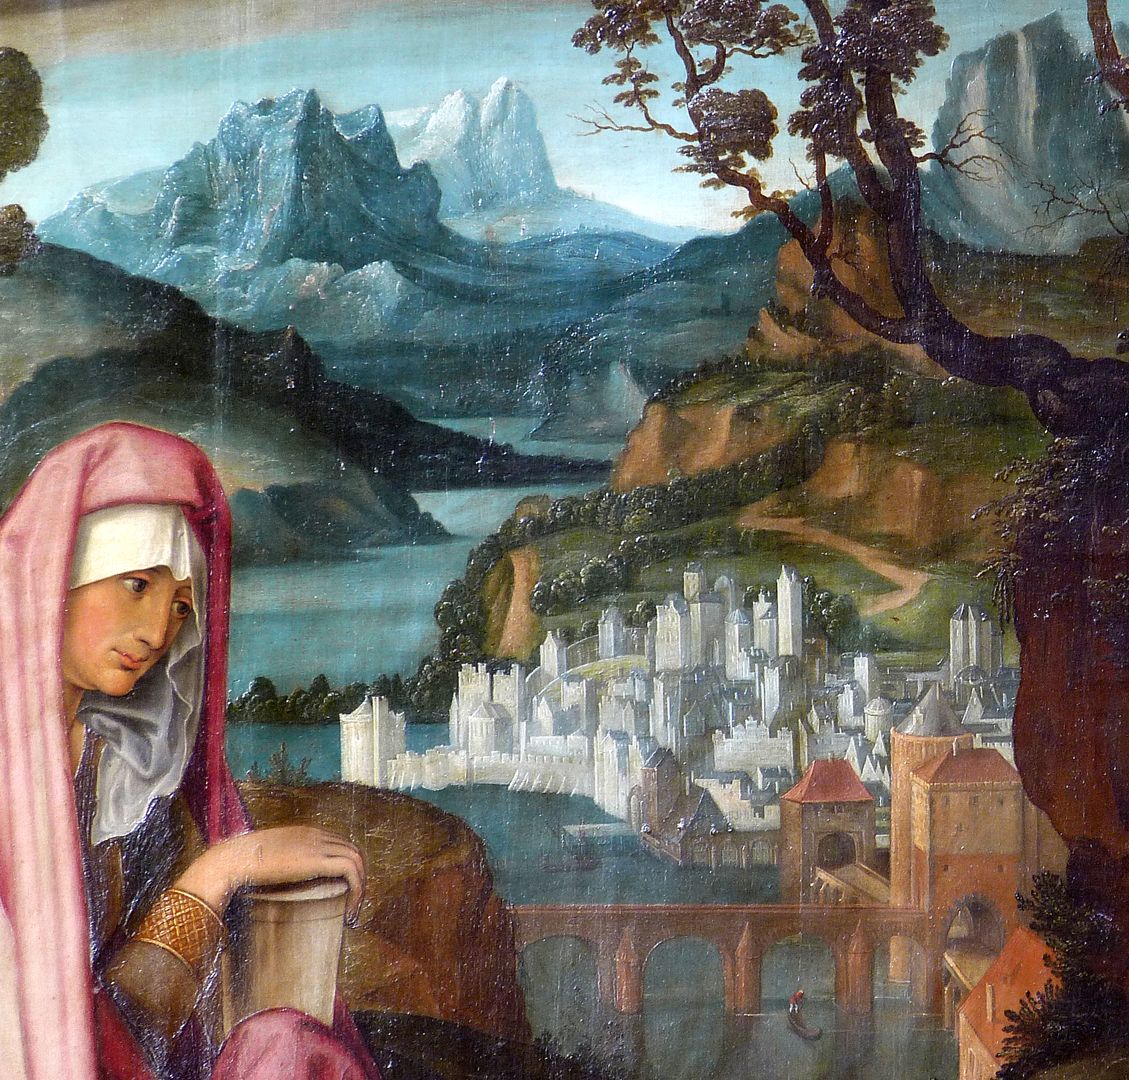 Lamentation of Christ In the background there is a landscape and a fantasy city, in front of it is Mary Magdalene with an ointment jar in her hands